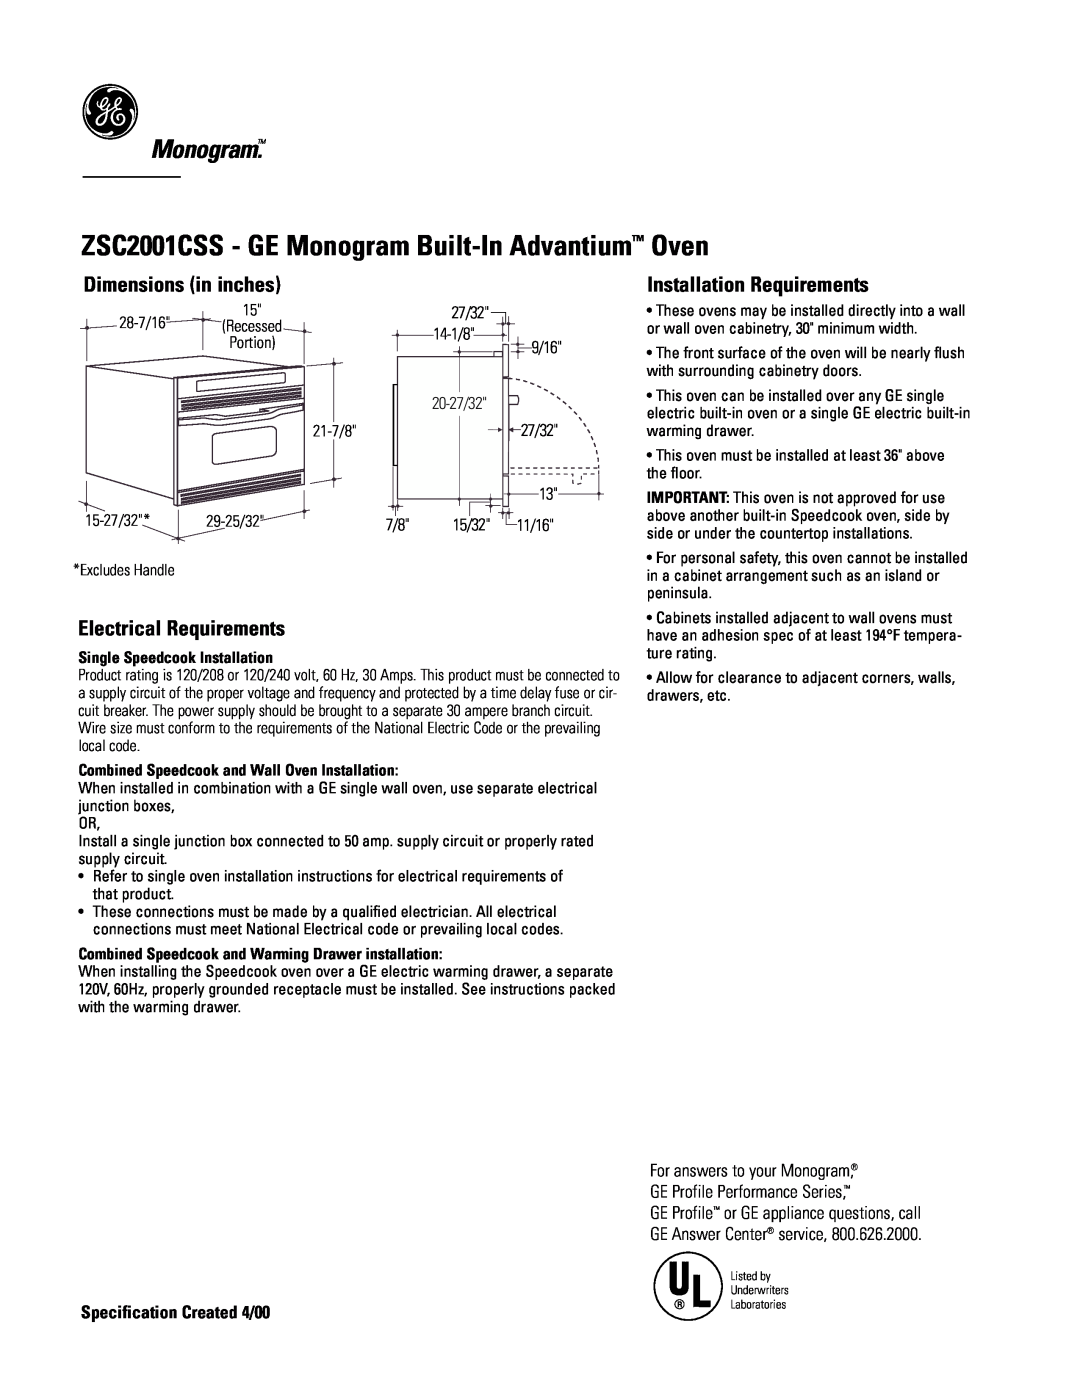 GE Monogram dimensions ZSC2001CSS - GE Monogram Built-In Advantium Oven, Dimensions in inches, Electrical Requirements 